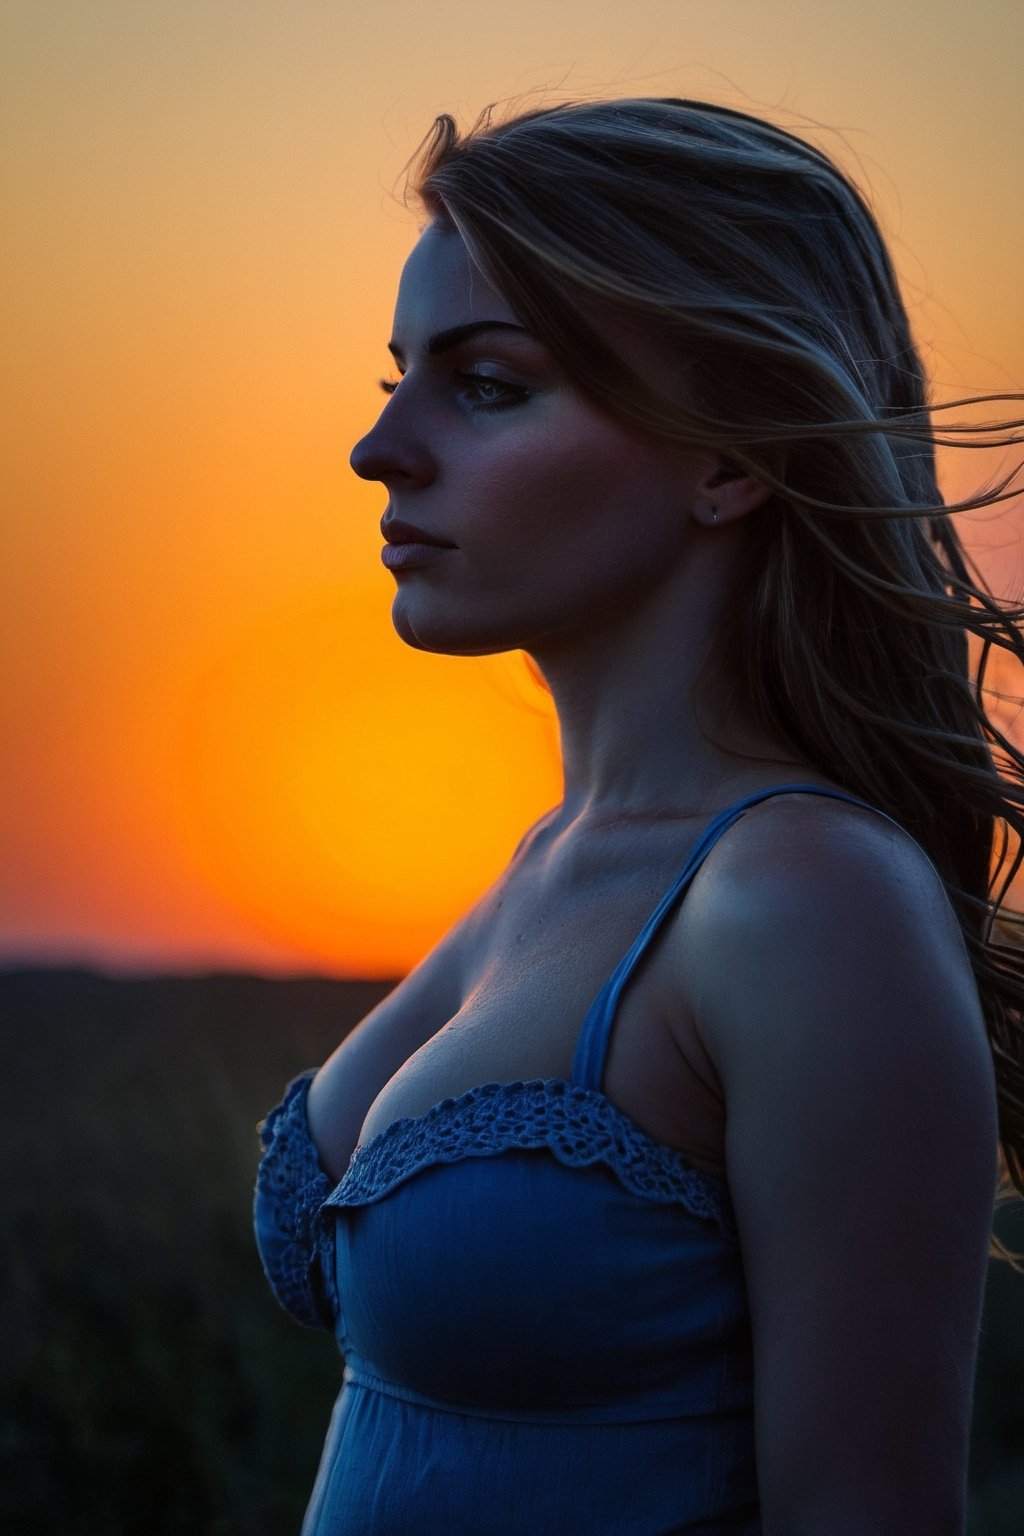 Upper body portrayal of a huge breast young girl, silhouette highlighted against the setting sun, BREAK Backdrop of a fiery sunset, radiant colors of twilight, horizon disappearing into the distance, BREAK Contemplative, peaceful, BREAK Oil painting, romantic realism, BREAK Soft, warm sunset light, strong backlighting, BREAK Close-up shot, shallow depth of field, BREAK High texture detail, high-definition, 4K